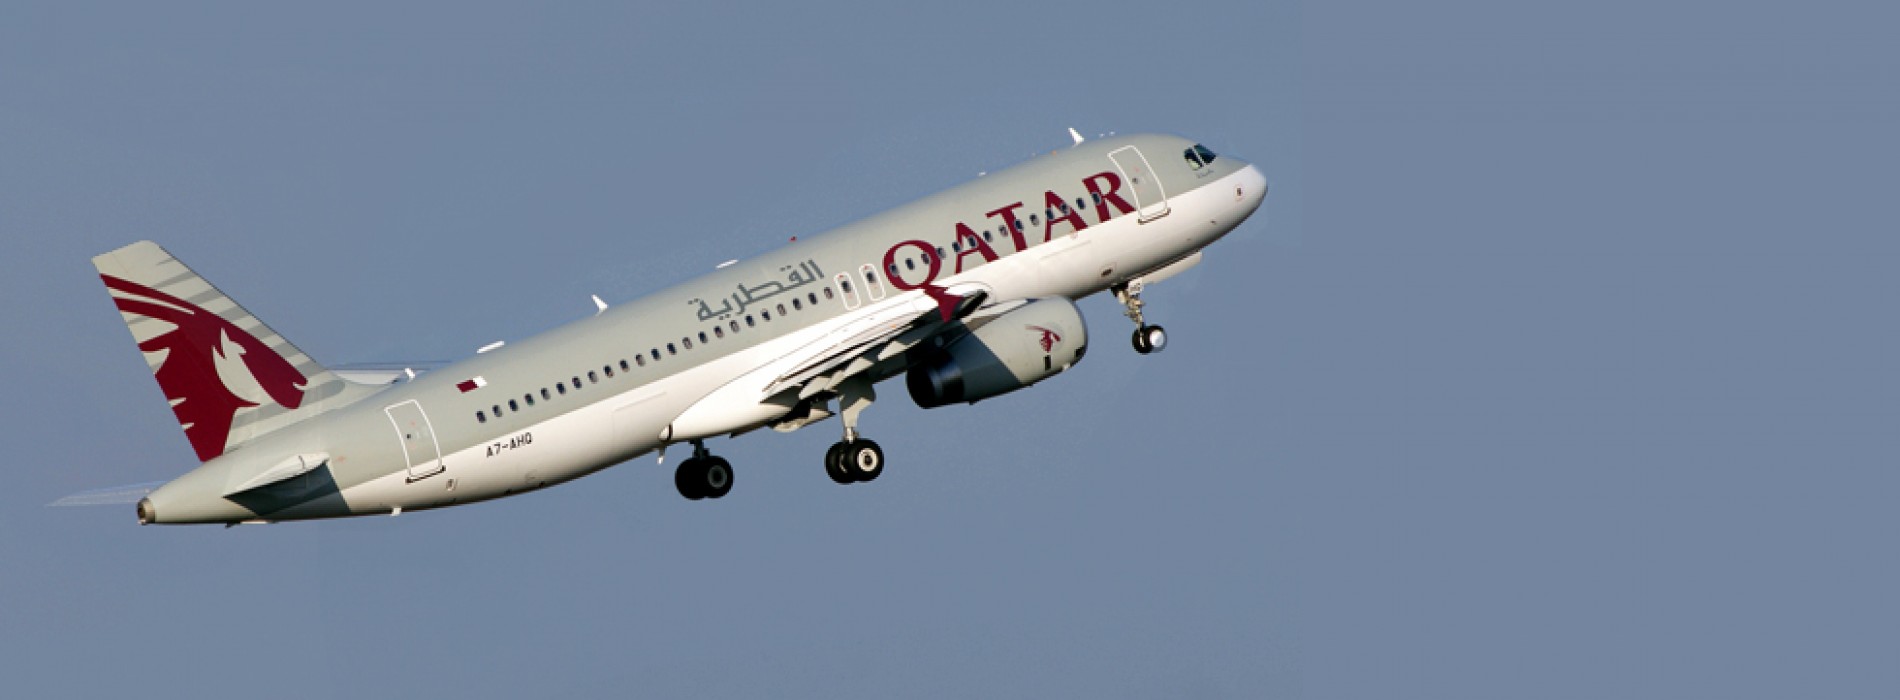 Qatar Airways may invest in Indian aviation sector